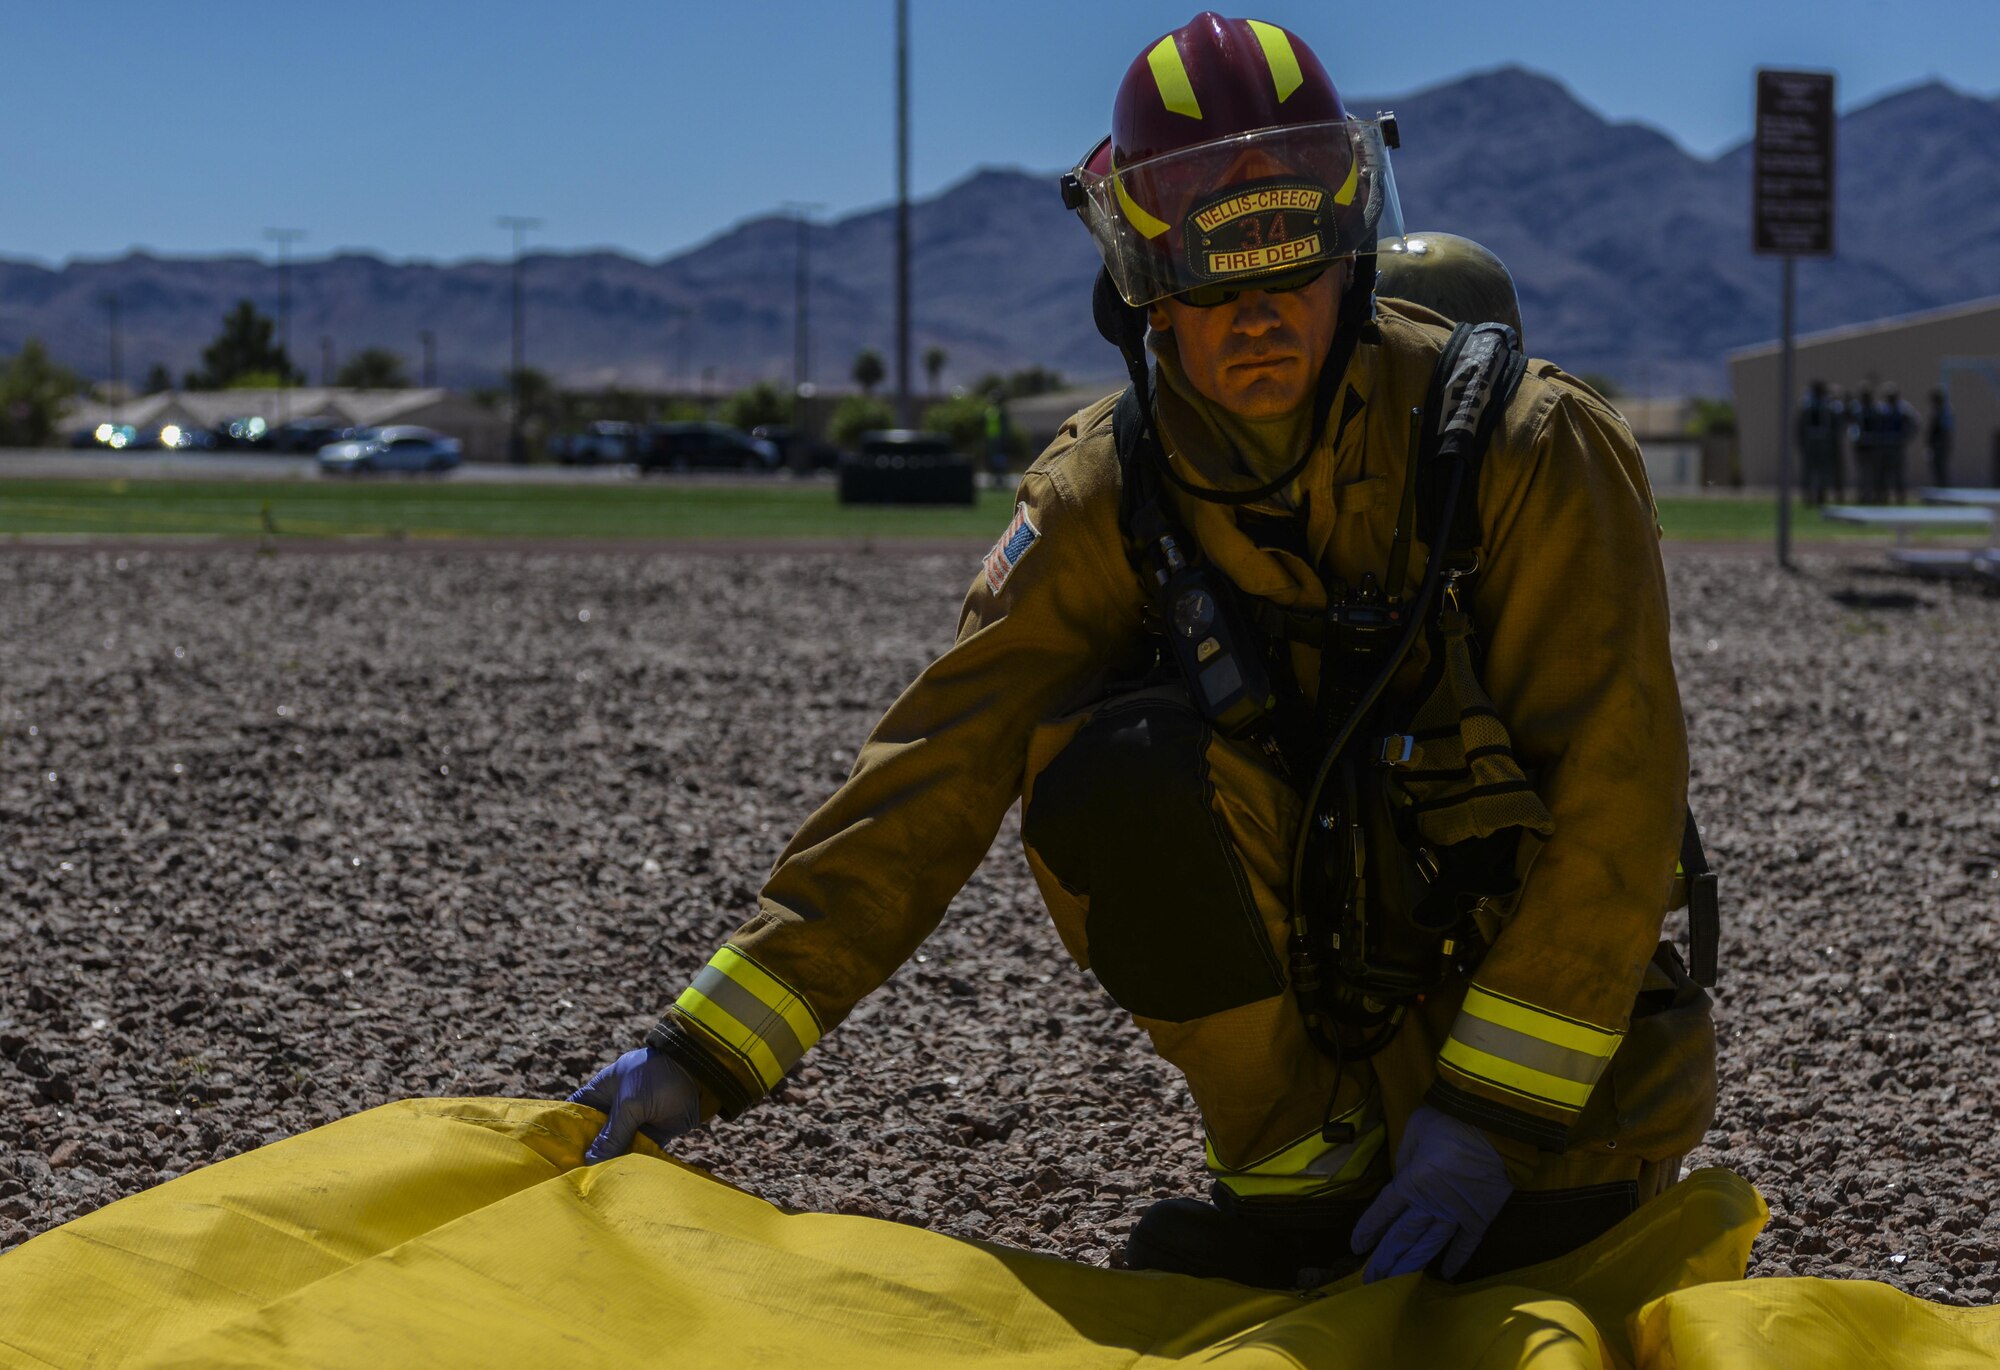 A 99th Civil Engineer Squadron Fire Protection Flight Airman spreads open a yellow triage tarp during a base exercise at Nellis Air Force Base, Nev., May 12, 2016. The simulated attacks occurred at the track at the Warrior Fitness Center during a mock squadron PT and at Hangar 220 during a mock ceremony. (U.S. Air Force photo by Airman 1st Class Kevin Tanenbaum)